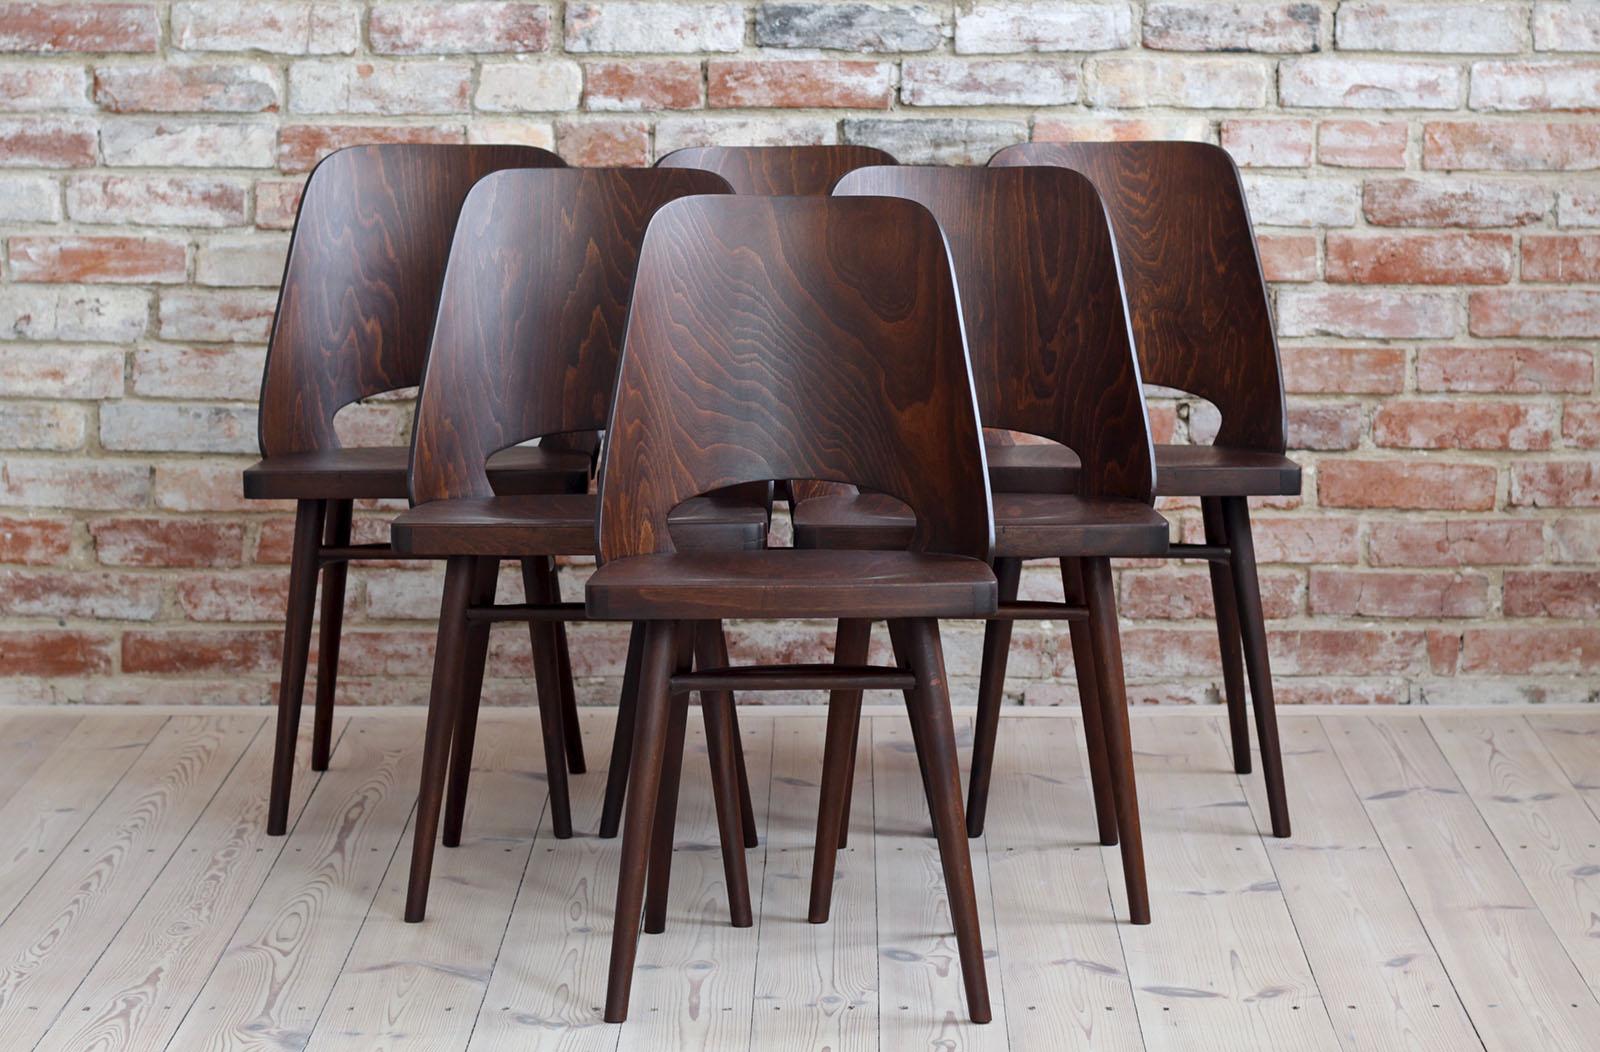 Set of 8 chairs designed by Oswald Haerdtl. The chairs are after complete renovation, have been cleaned, polished and refinished in natural oil which gave them a warm and natural look. They are veneered with beech wood. Beautiful set for a coffee